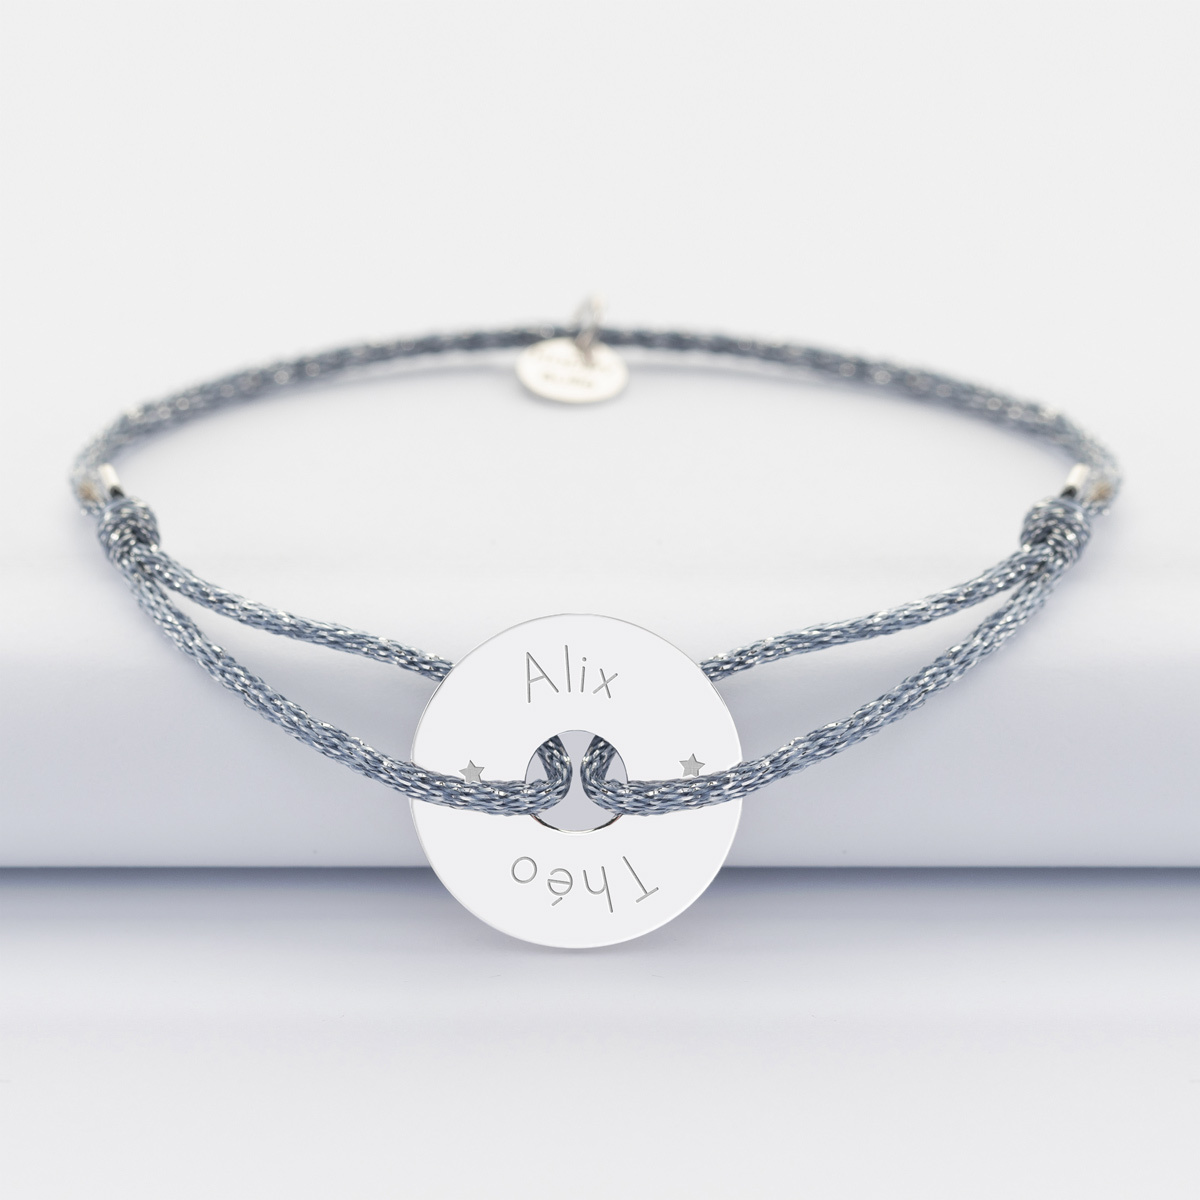 Sparkly cord bracelet with personalised engraved silver open disc 20mm